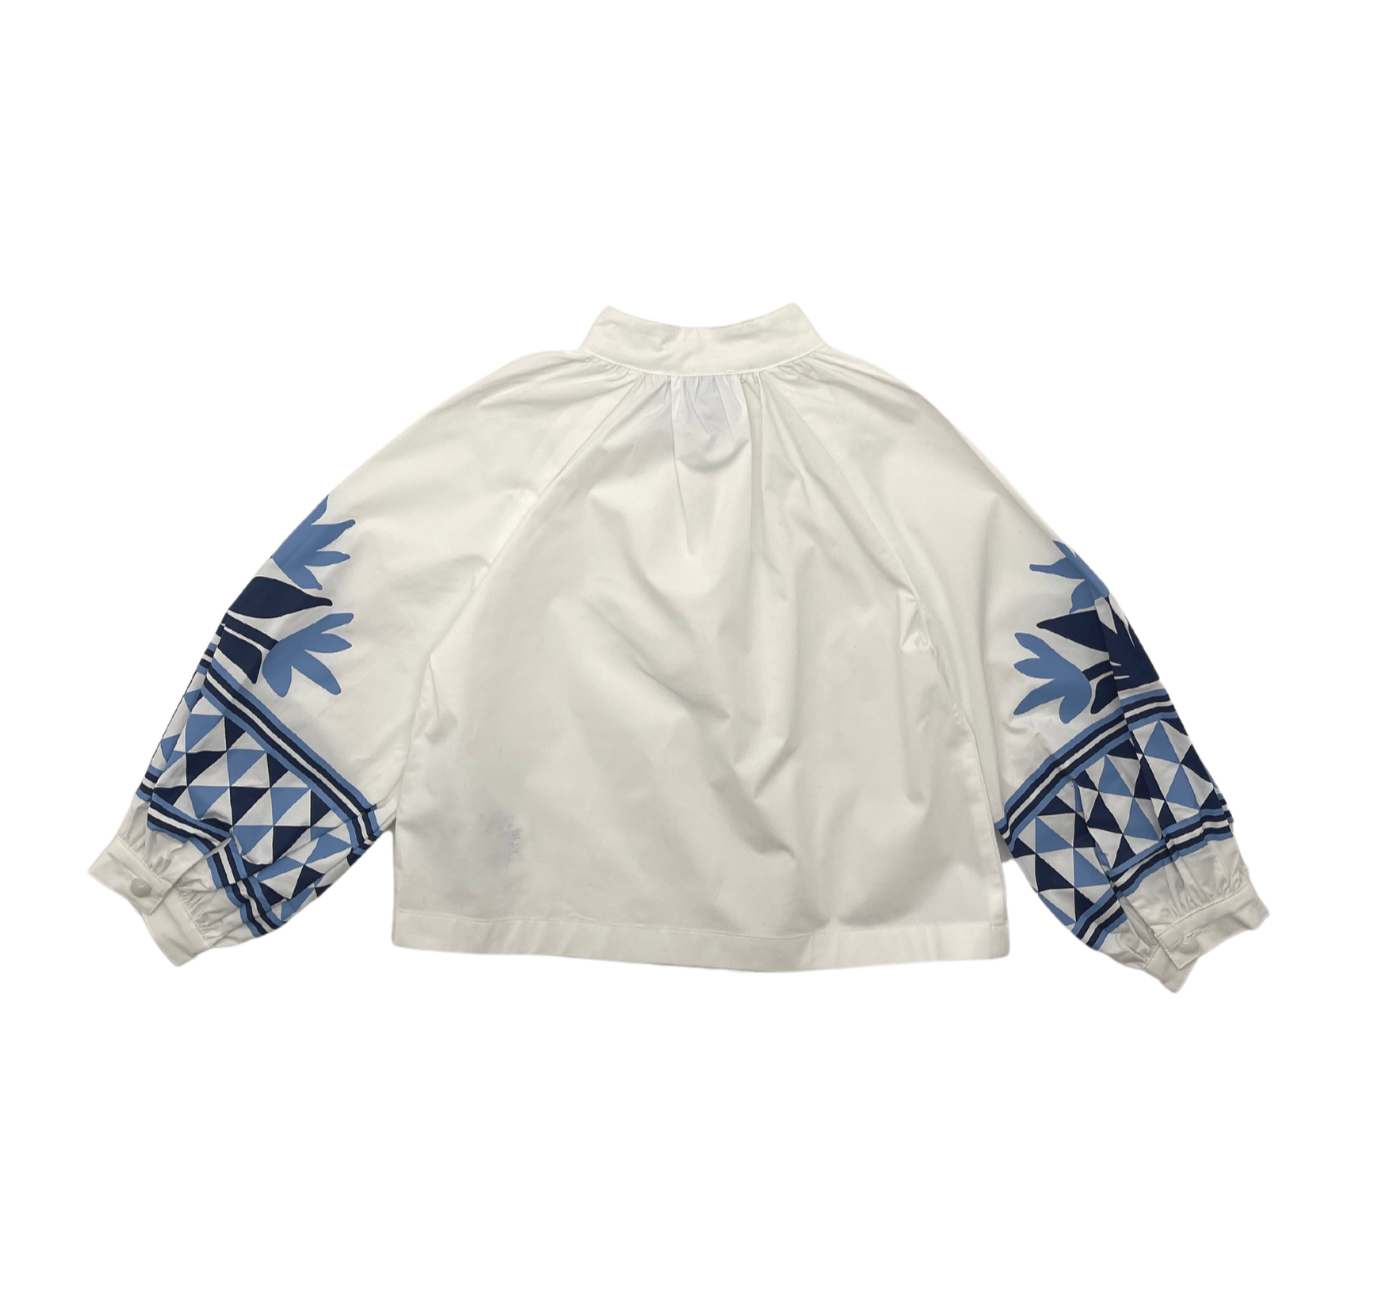 STELLA JEAN - Blouse with patterned sleeves - 2 years old